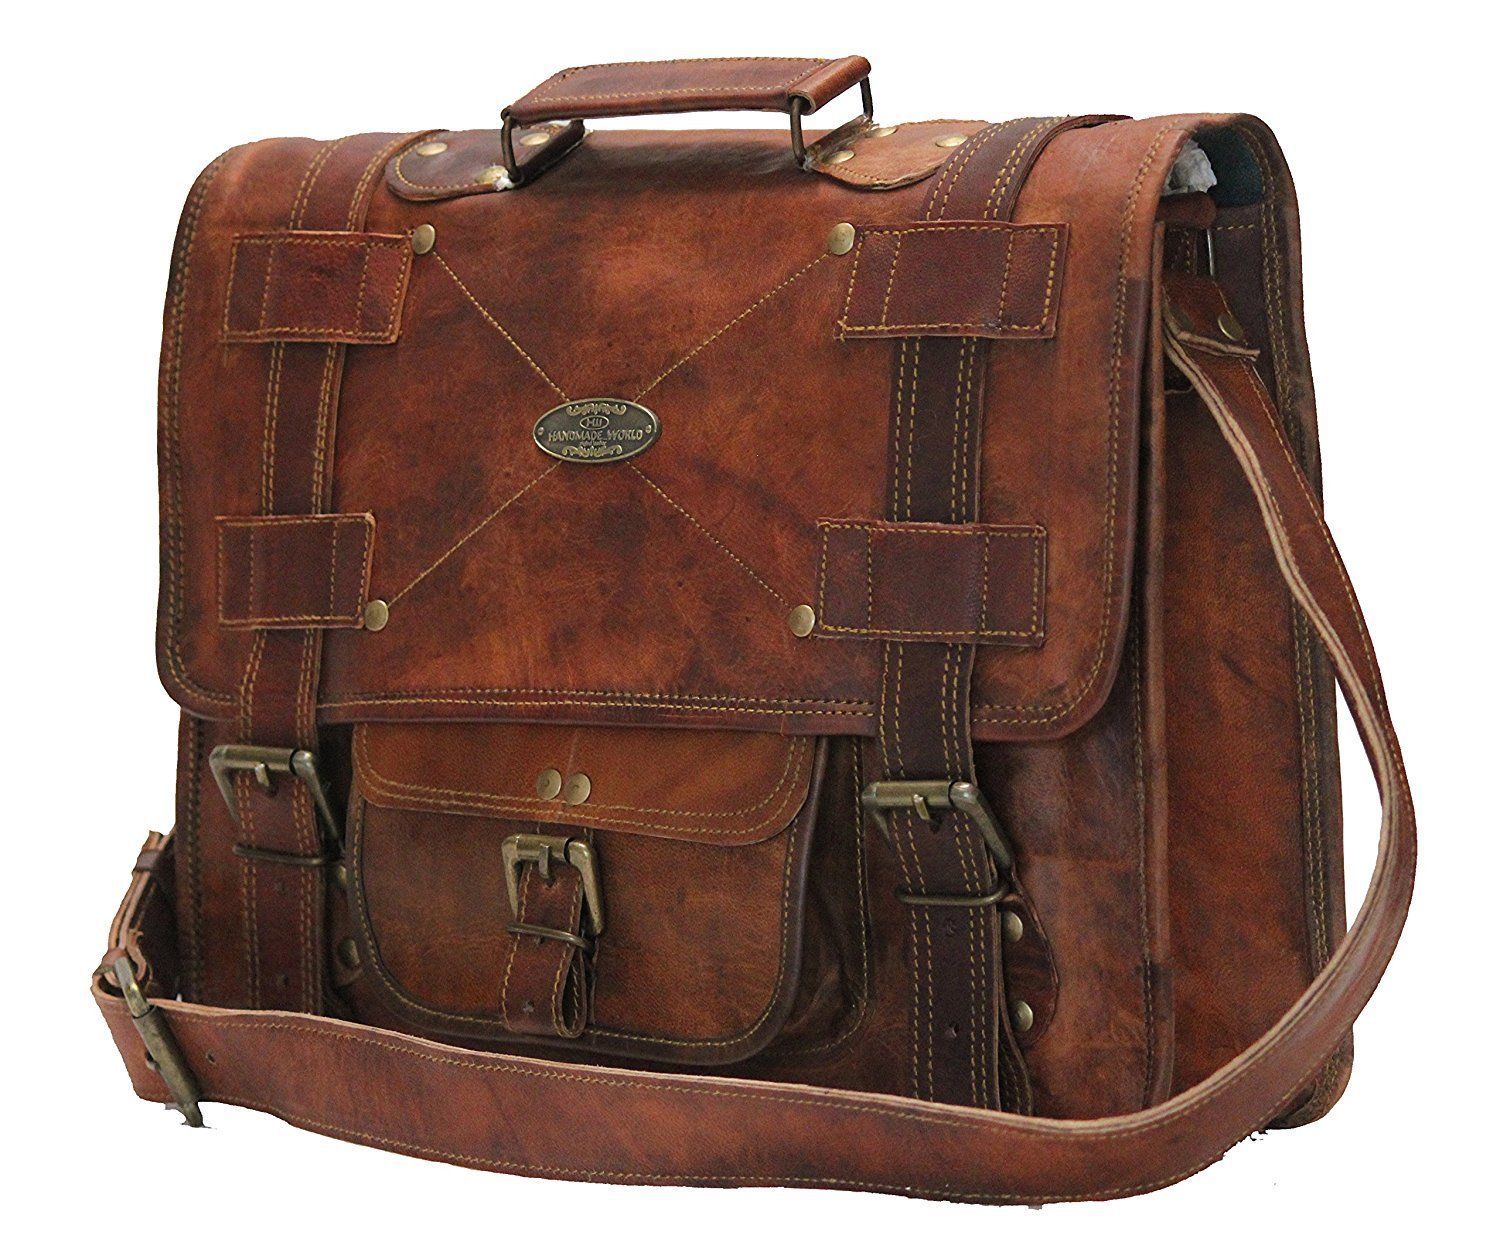 New Well Made Leather Messenger Bag Genuine Vintage Leather Laptop ...